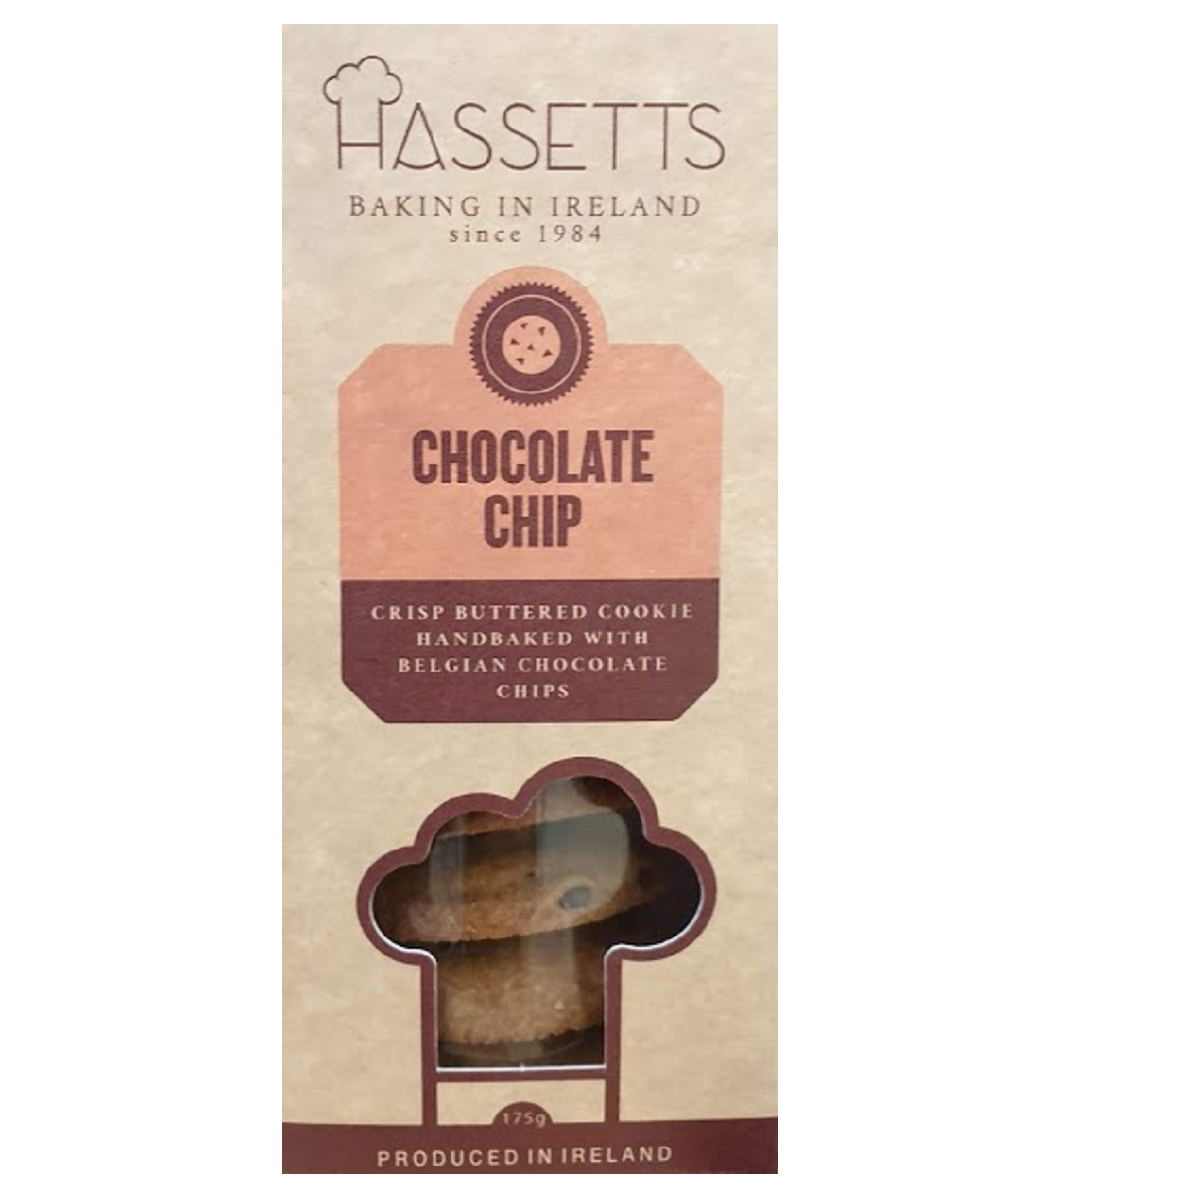 Hassetts Chocolate Chip Crisp Buttered Cookie 175g